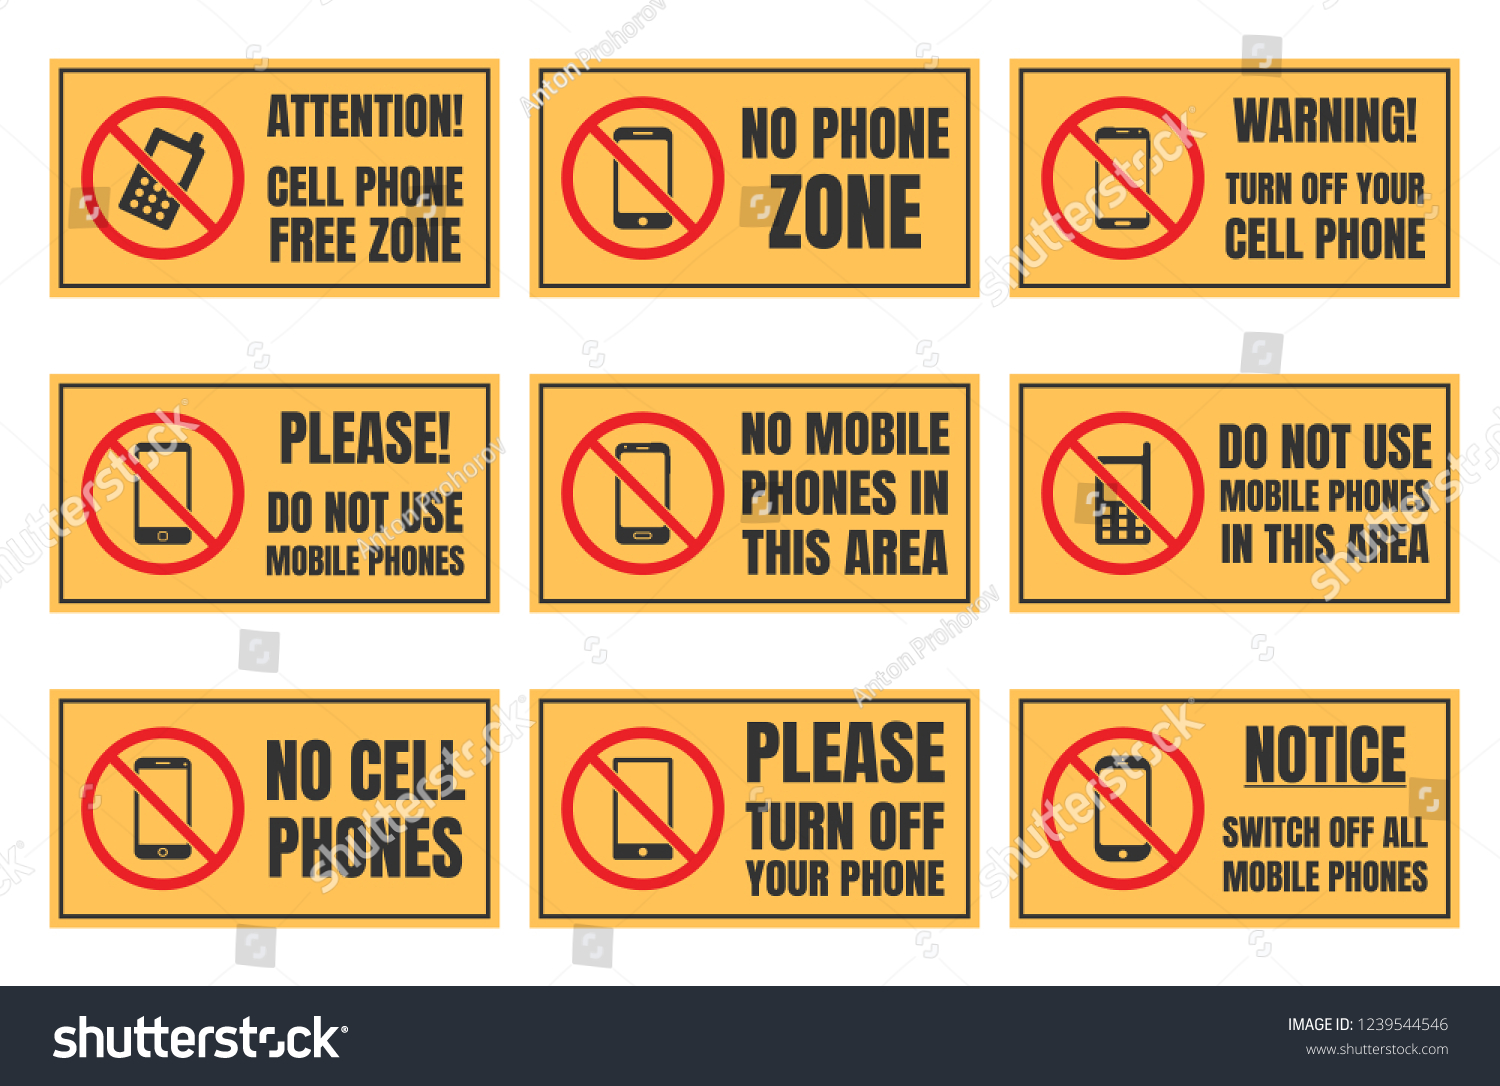 no-cell-phone-sign-mobile-phone-stock-vector-royalty-free-1239544546